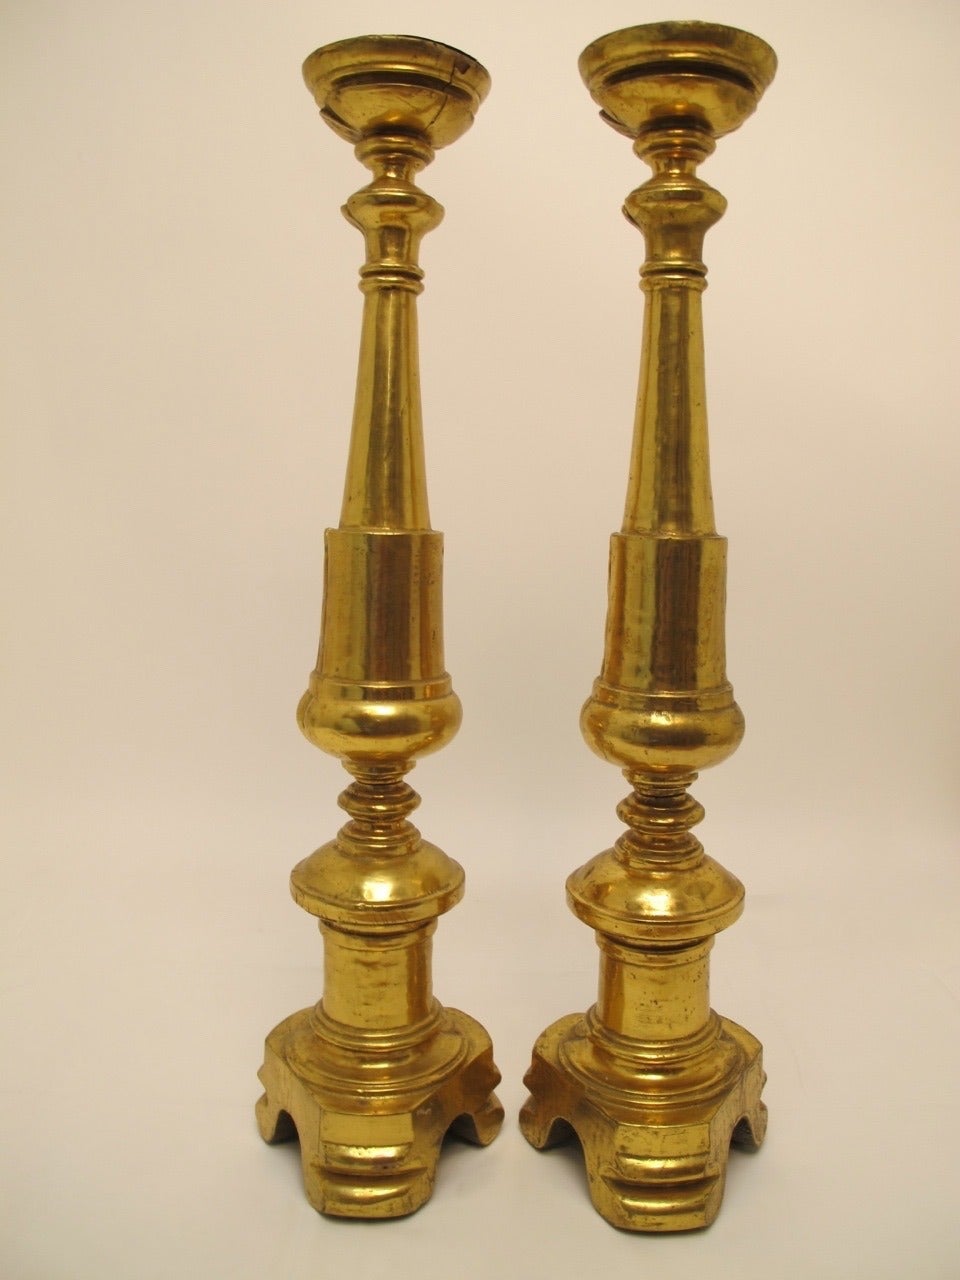 A robust pair of carved and gilt candlesticks with turned baluster shape columns sitting on trefoil bases and with scrolled feet. Italian, 19th century.